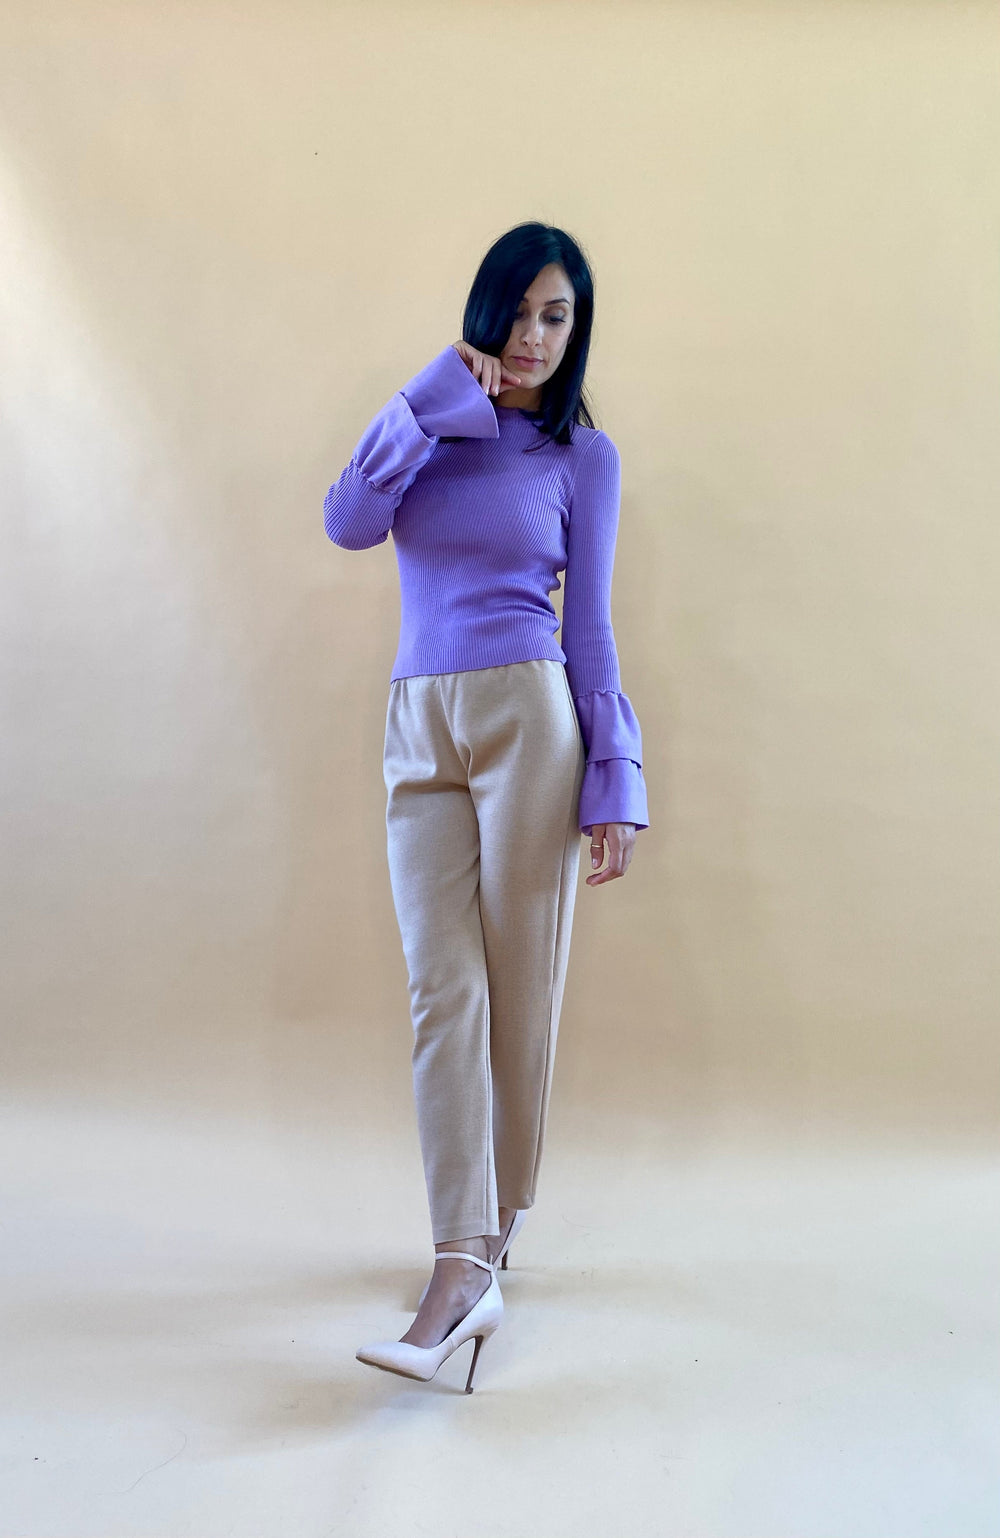 Woman wearing a purple long-sleeve top with bell sleeves and beige pants posing against a beige background